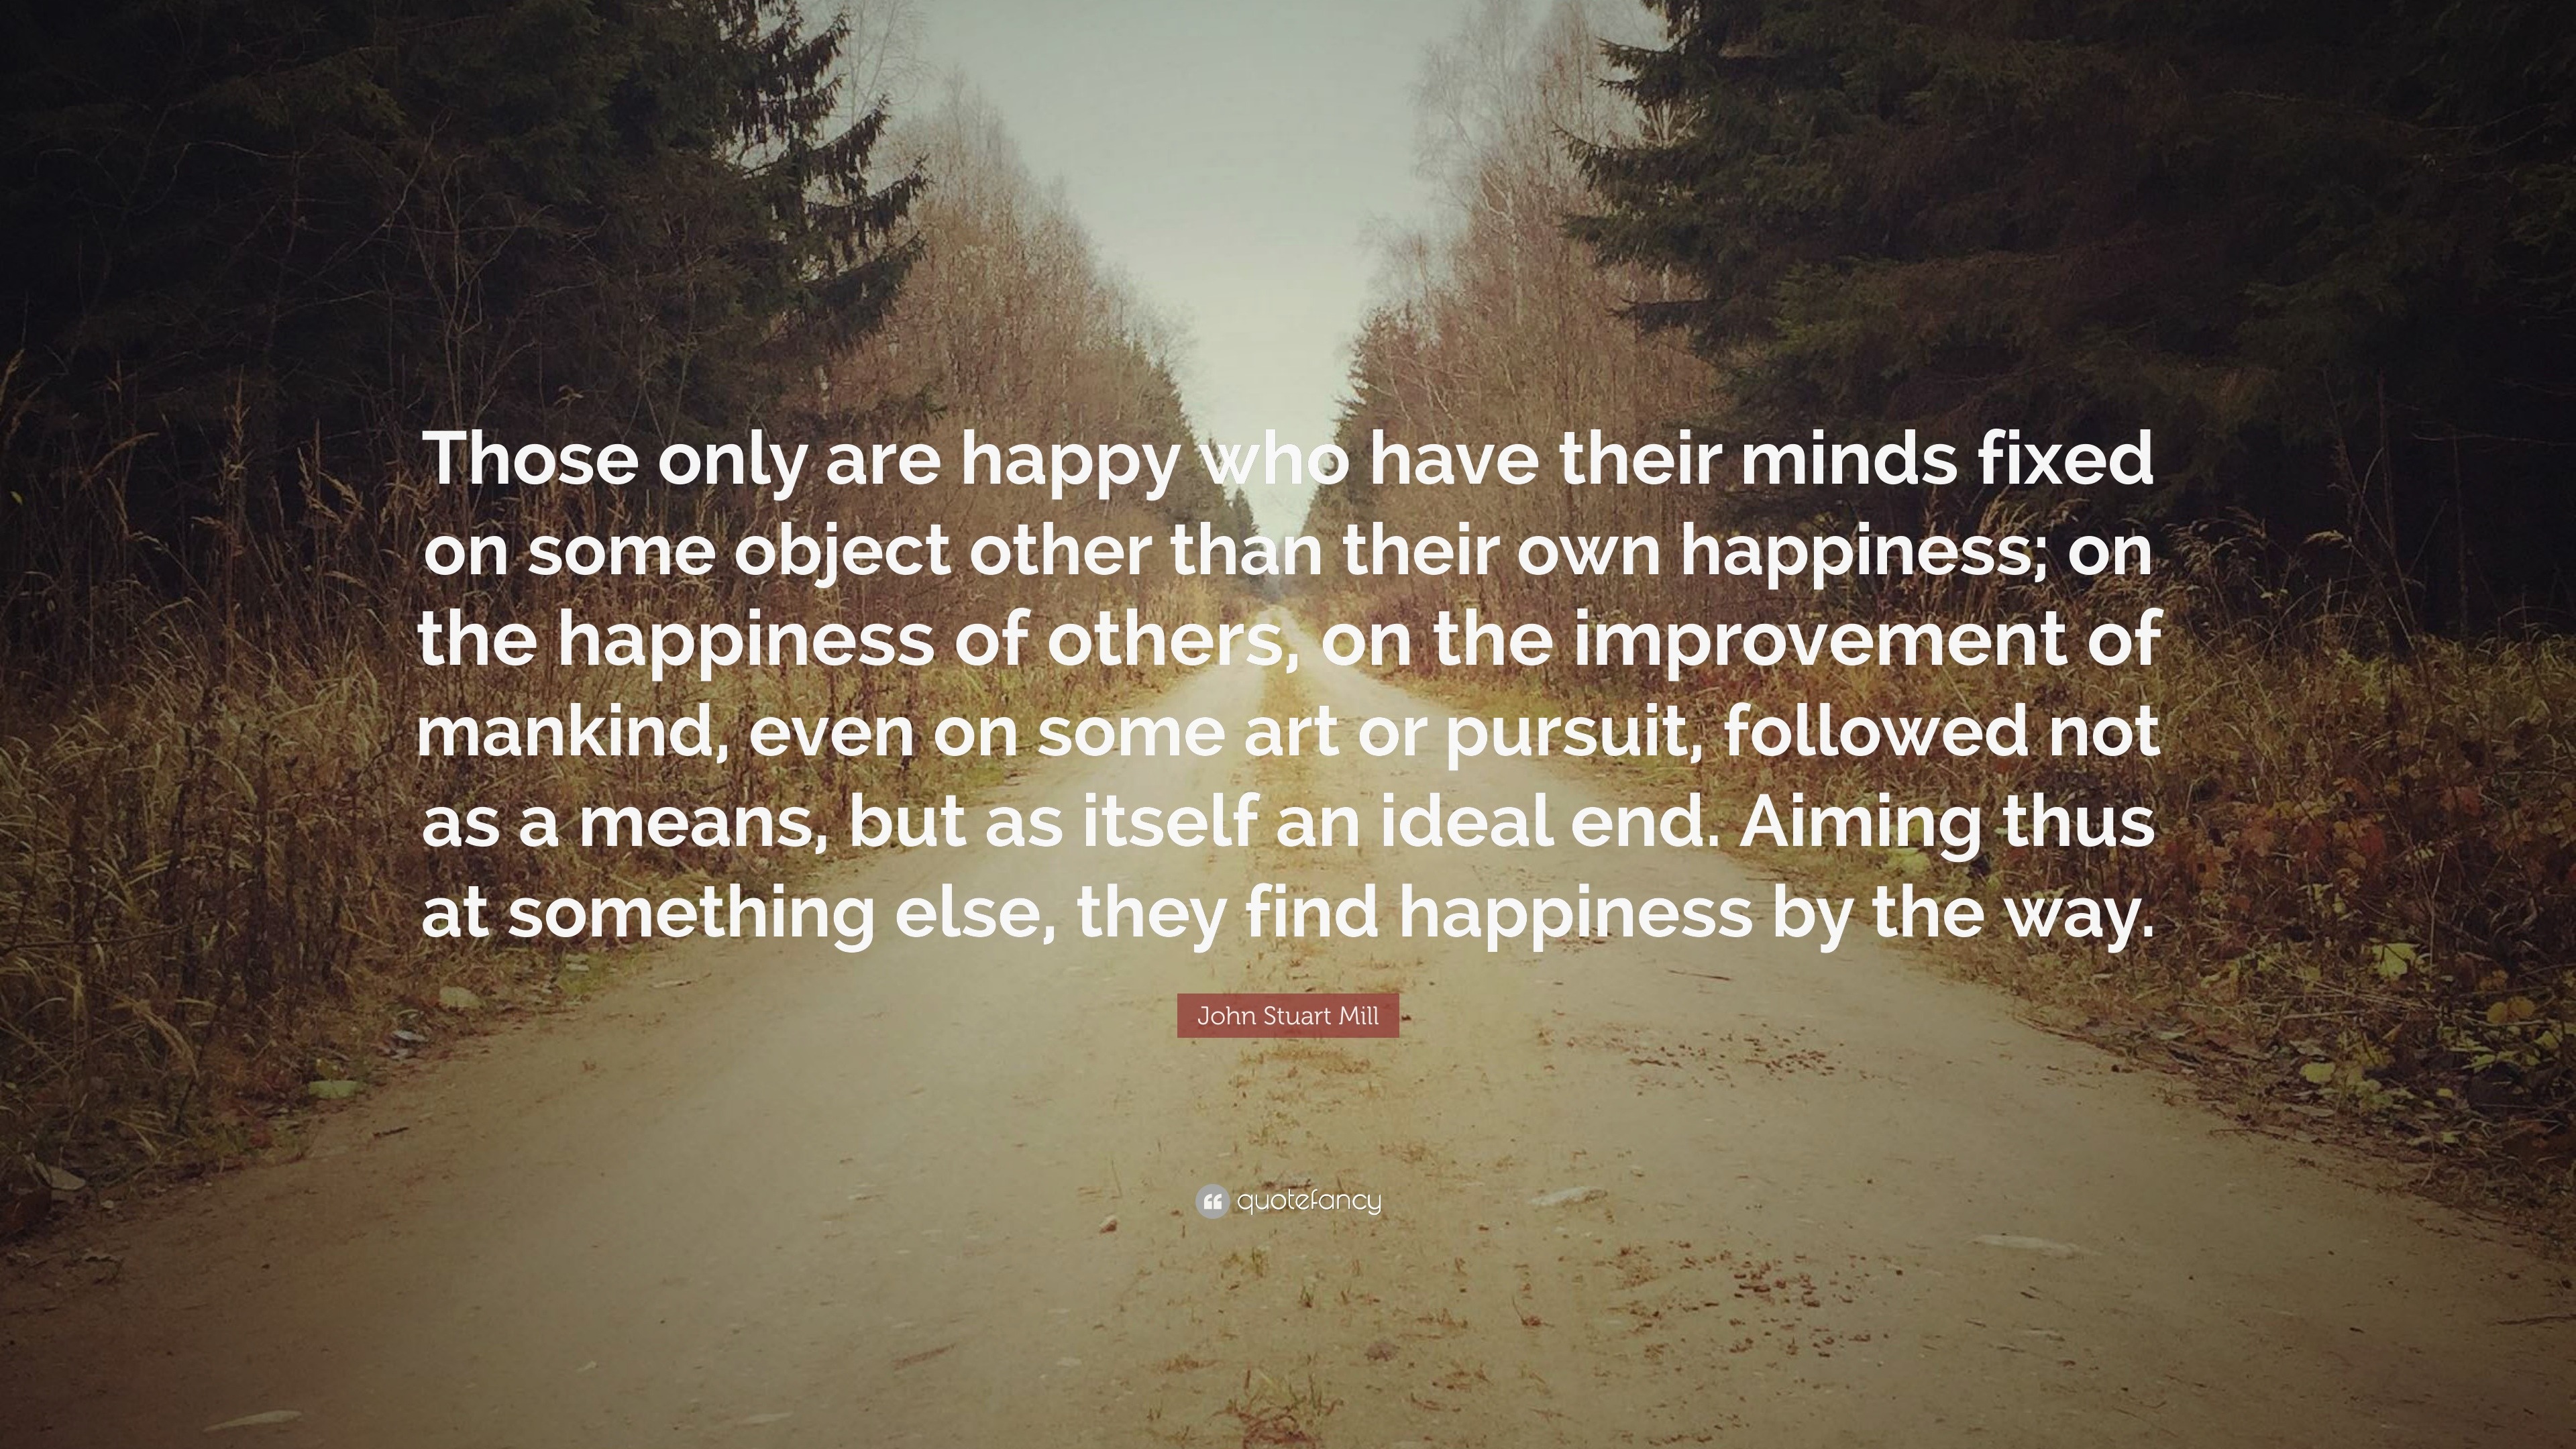 mill on happiness